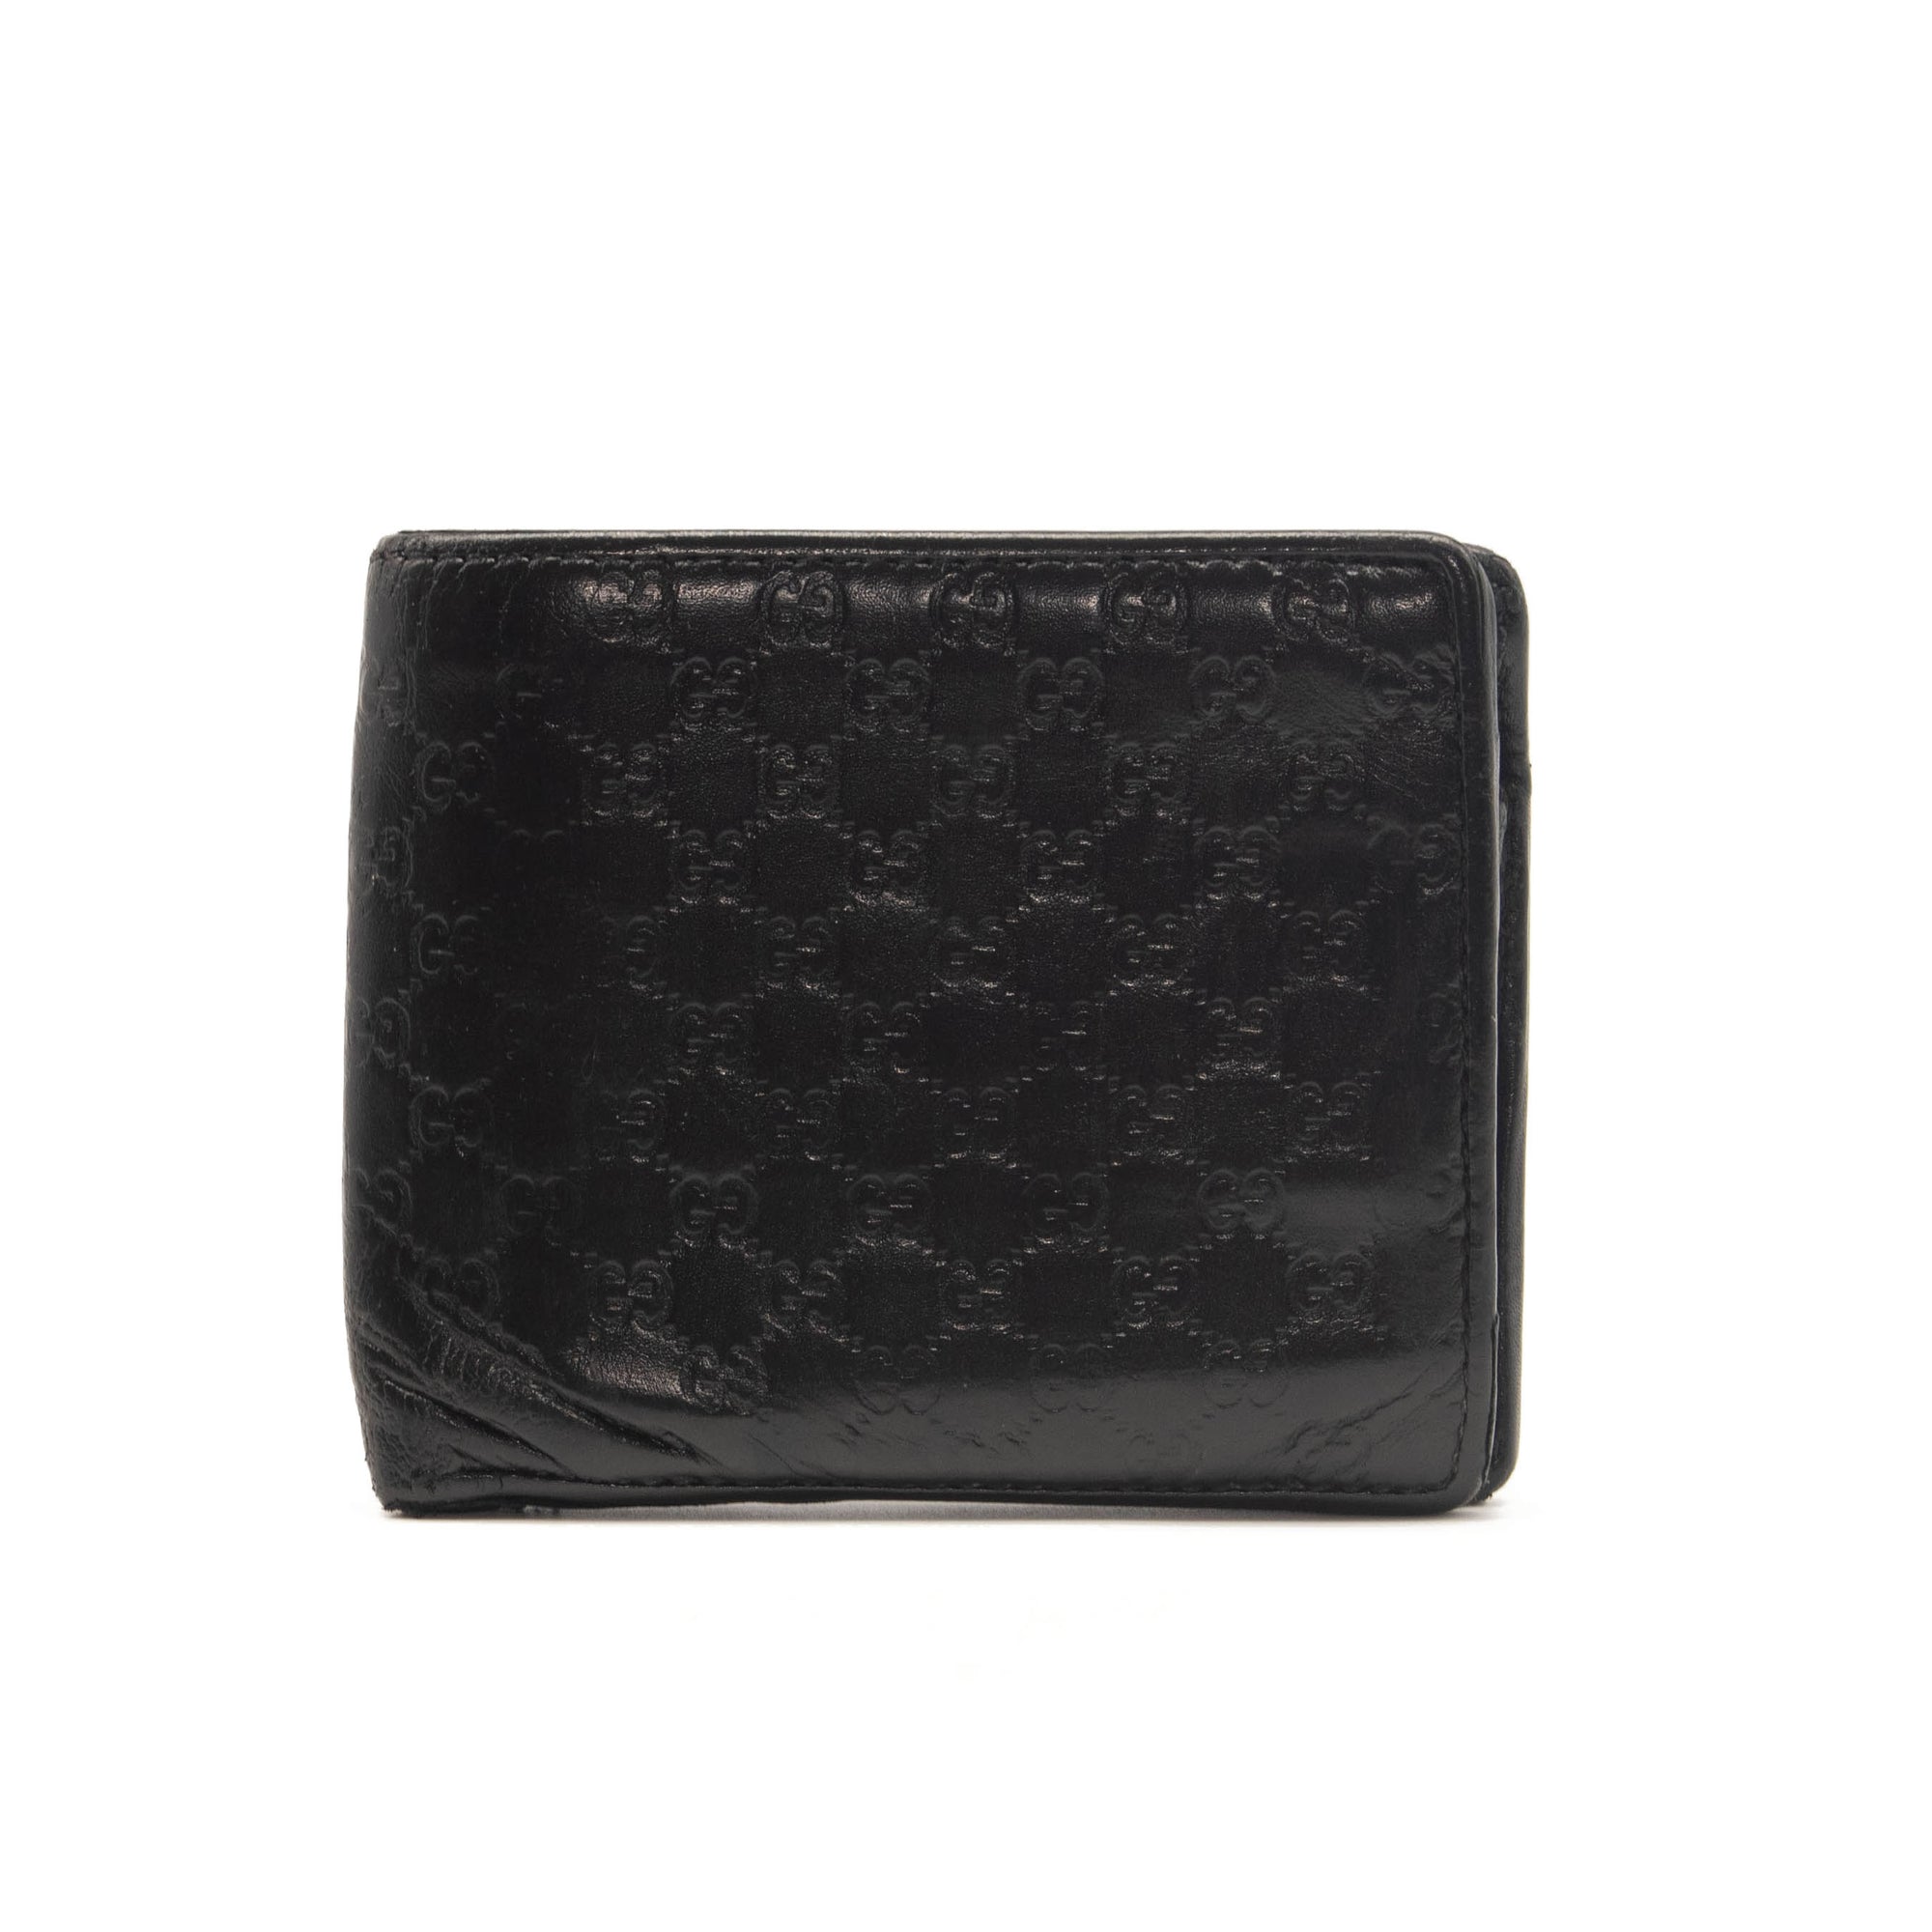 GUCCI Dark Brown Leather Guccissima Embossed Monogram GG Unisex Long Wallet